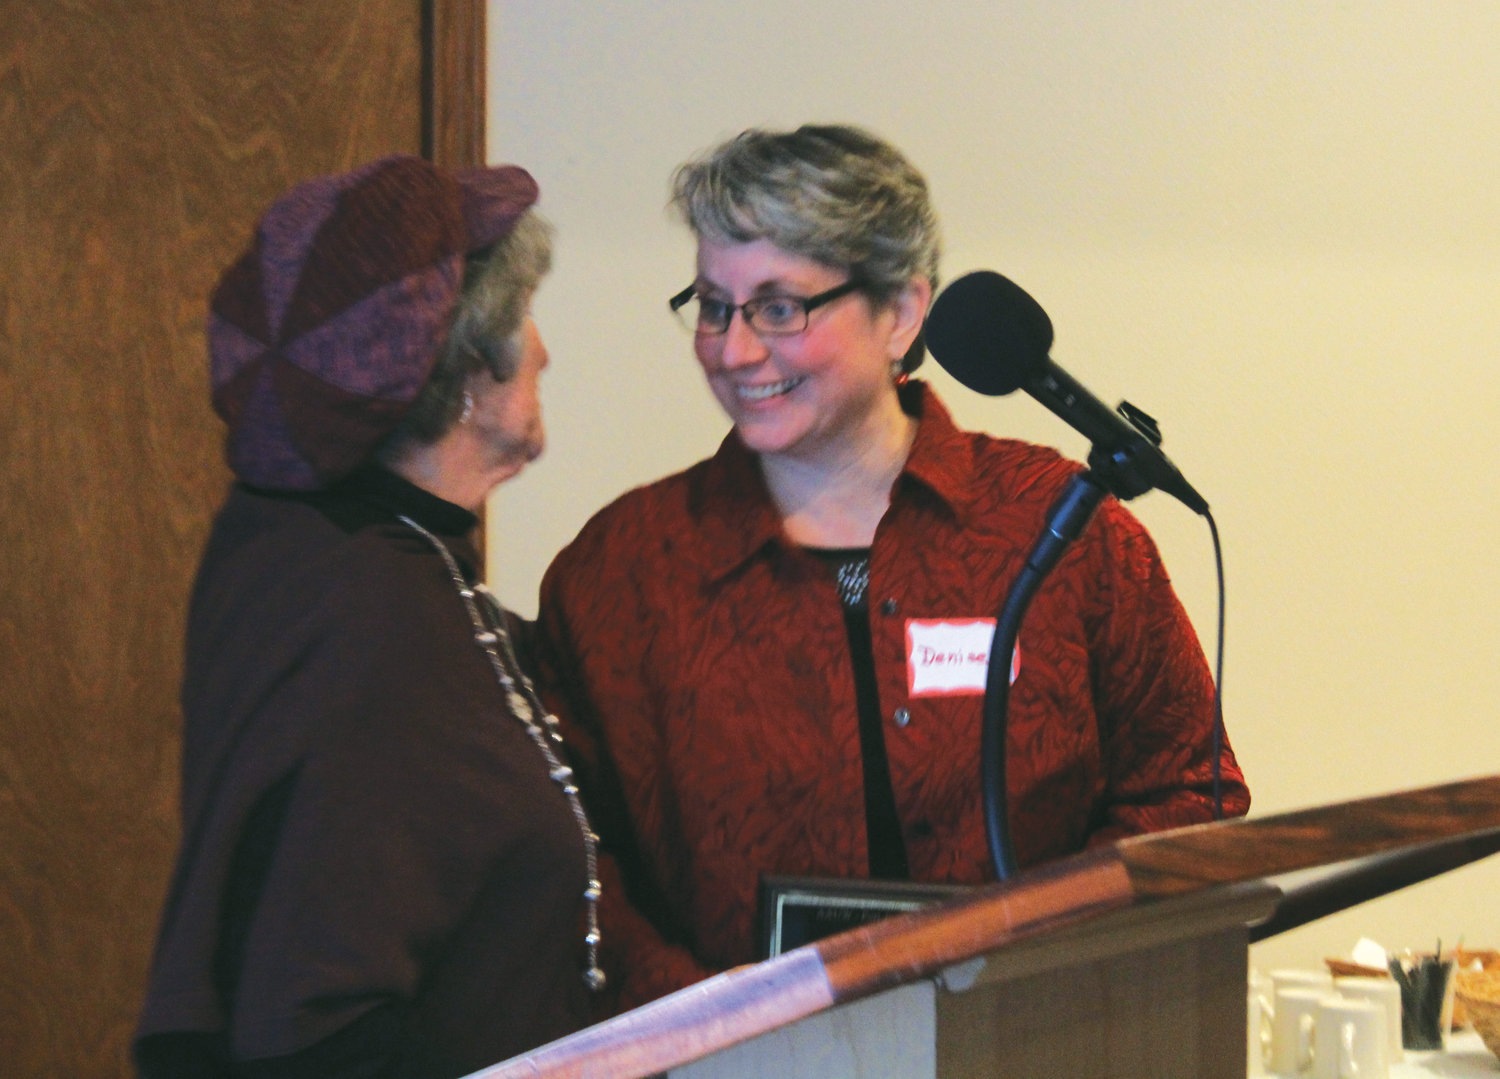 AAUW’s Michael Kubek, left, presents Key City Public Theater Artistic Director Denise Winter with the Woman of Excellence award on Dec. 1.